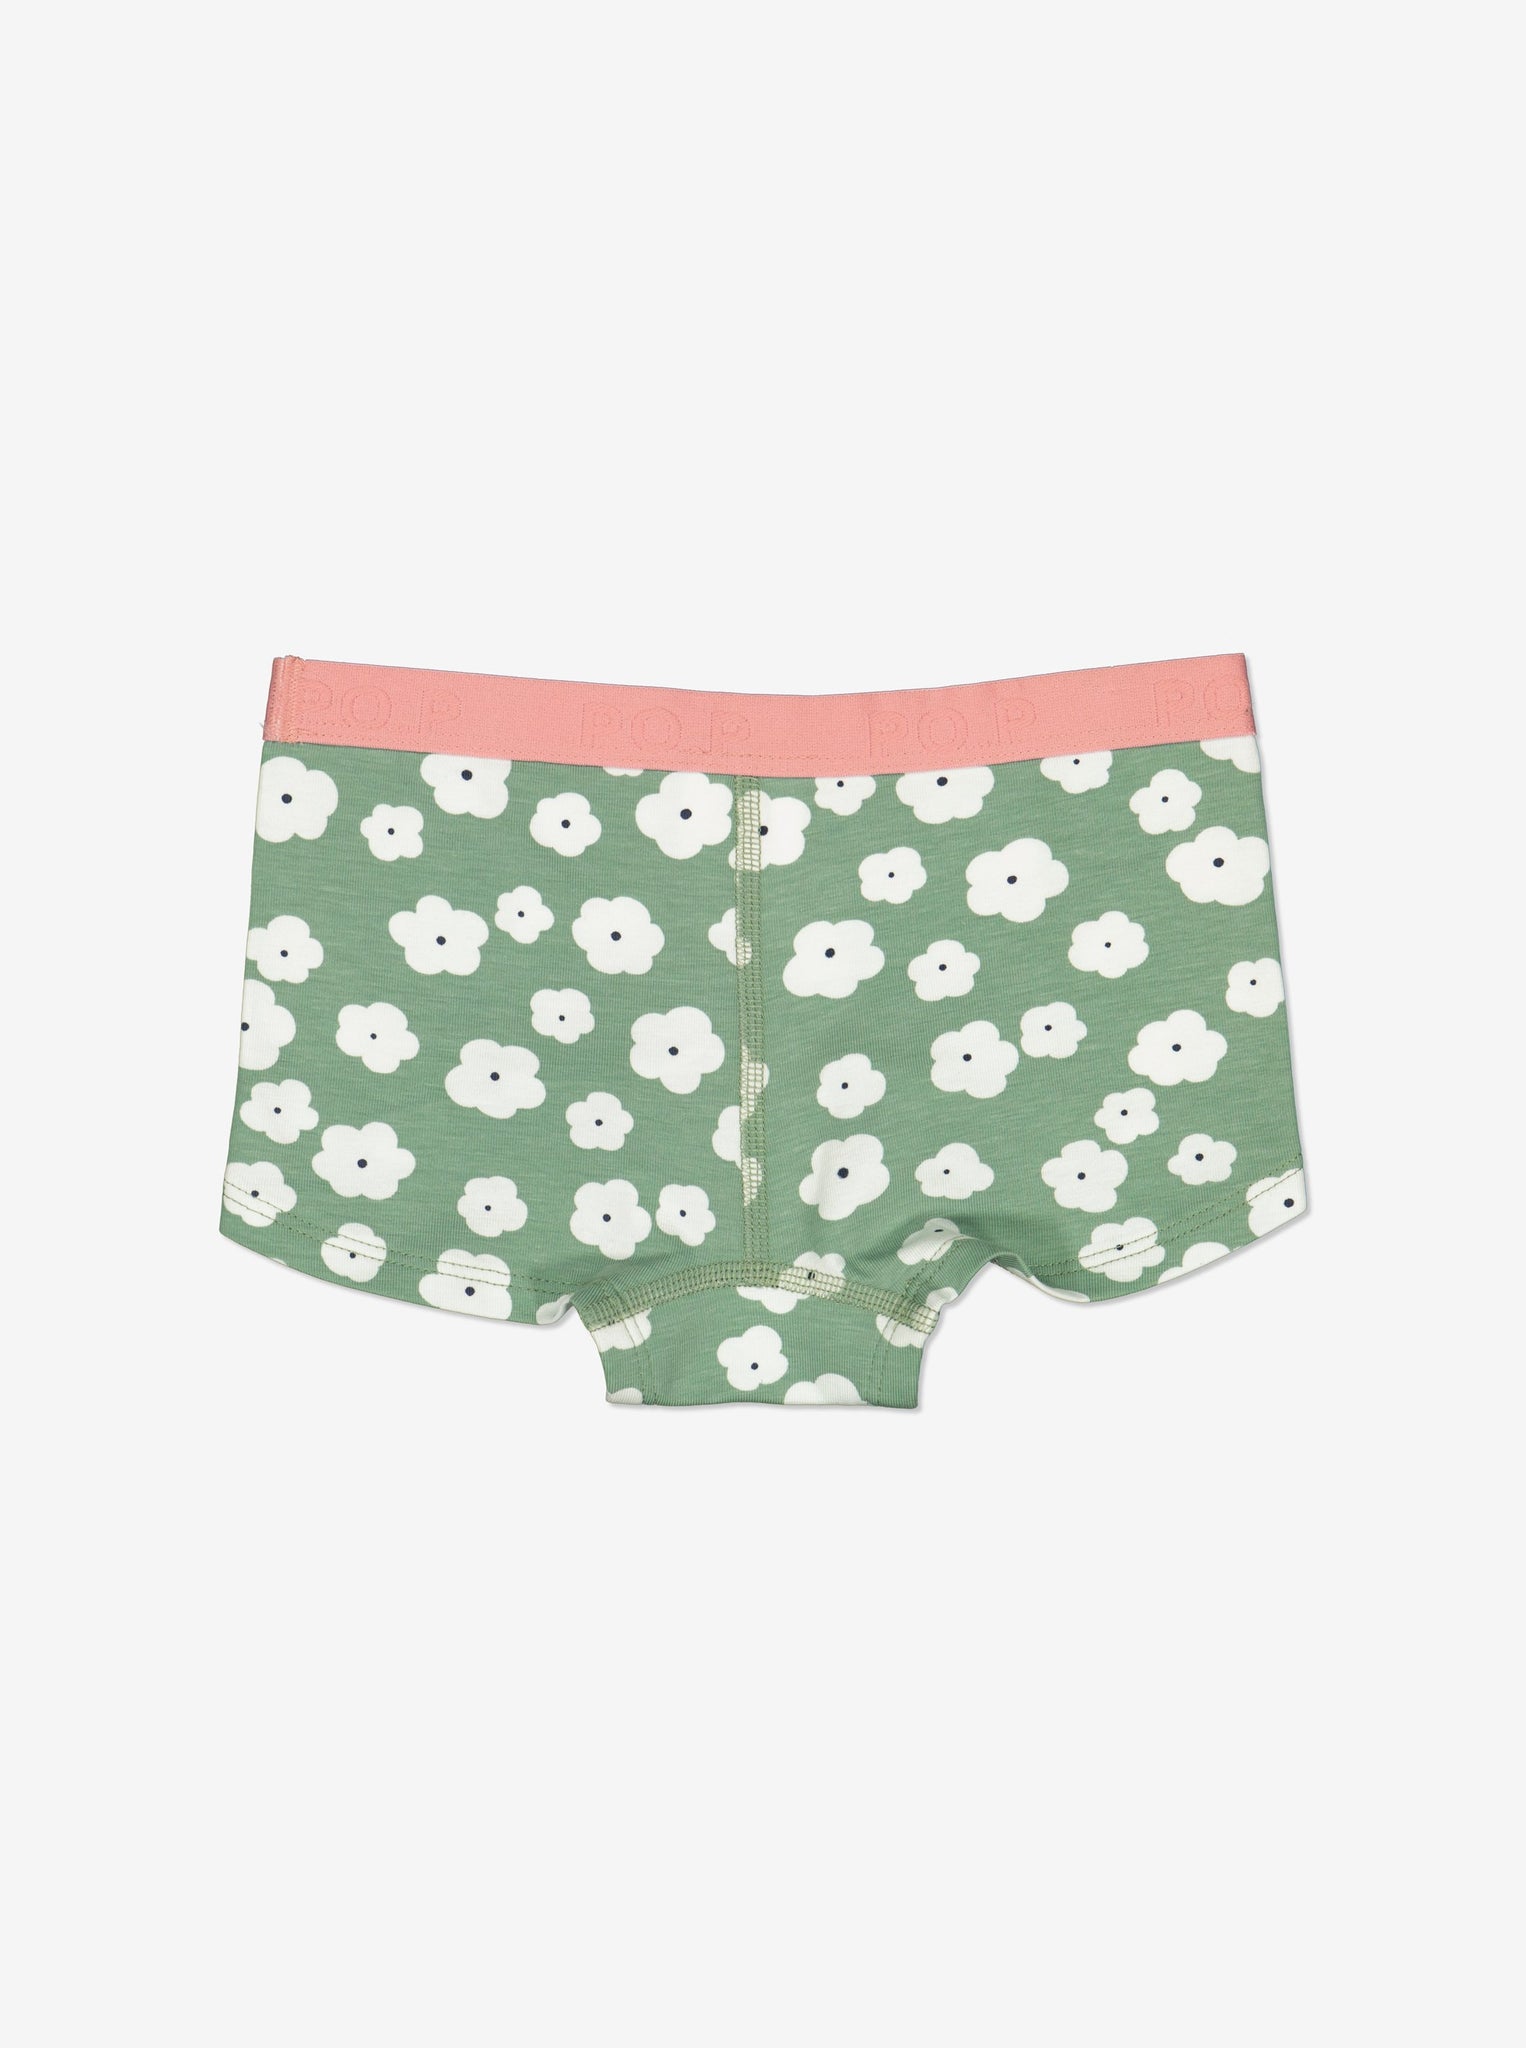  Organic Green Floral Girls Briefs from Polarn O. Pyret Kidswear. Made from sustainable materials.